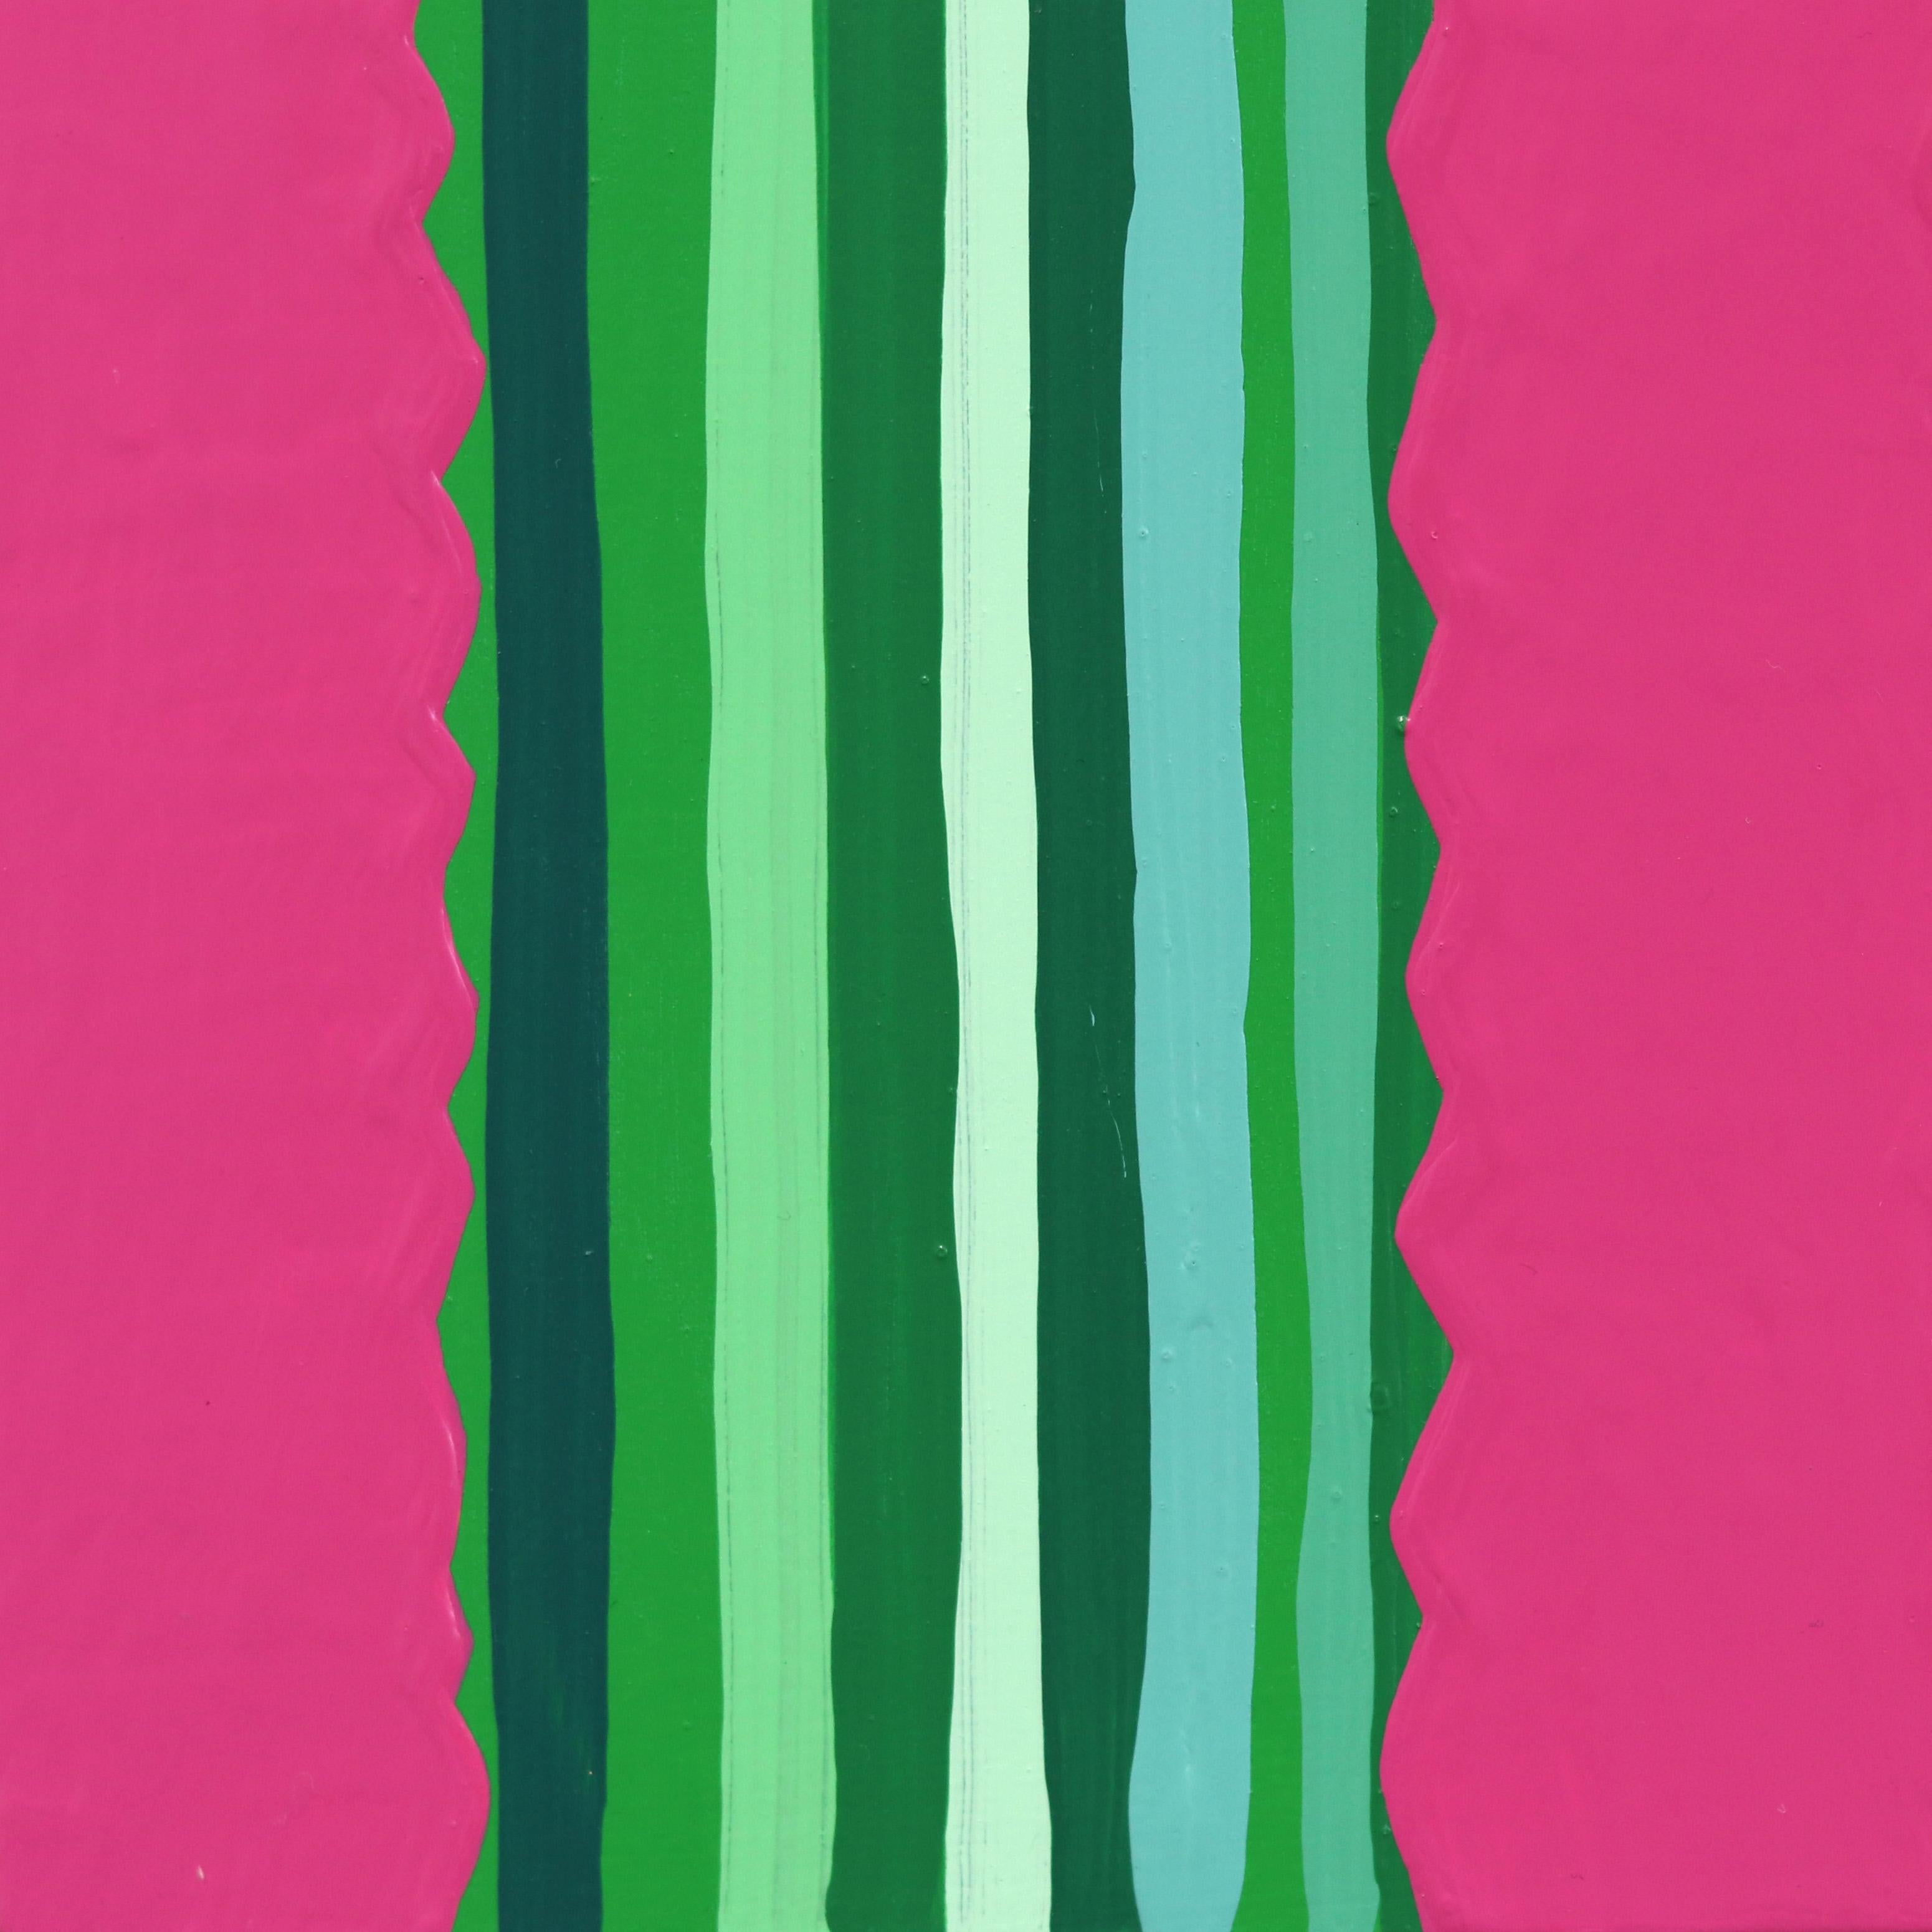 Rosa Picante - Vibrant Pink Green Southwest Inspired Pop Art Cactus Painting For Sale 5